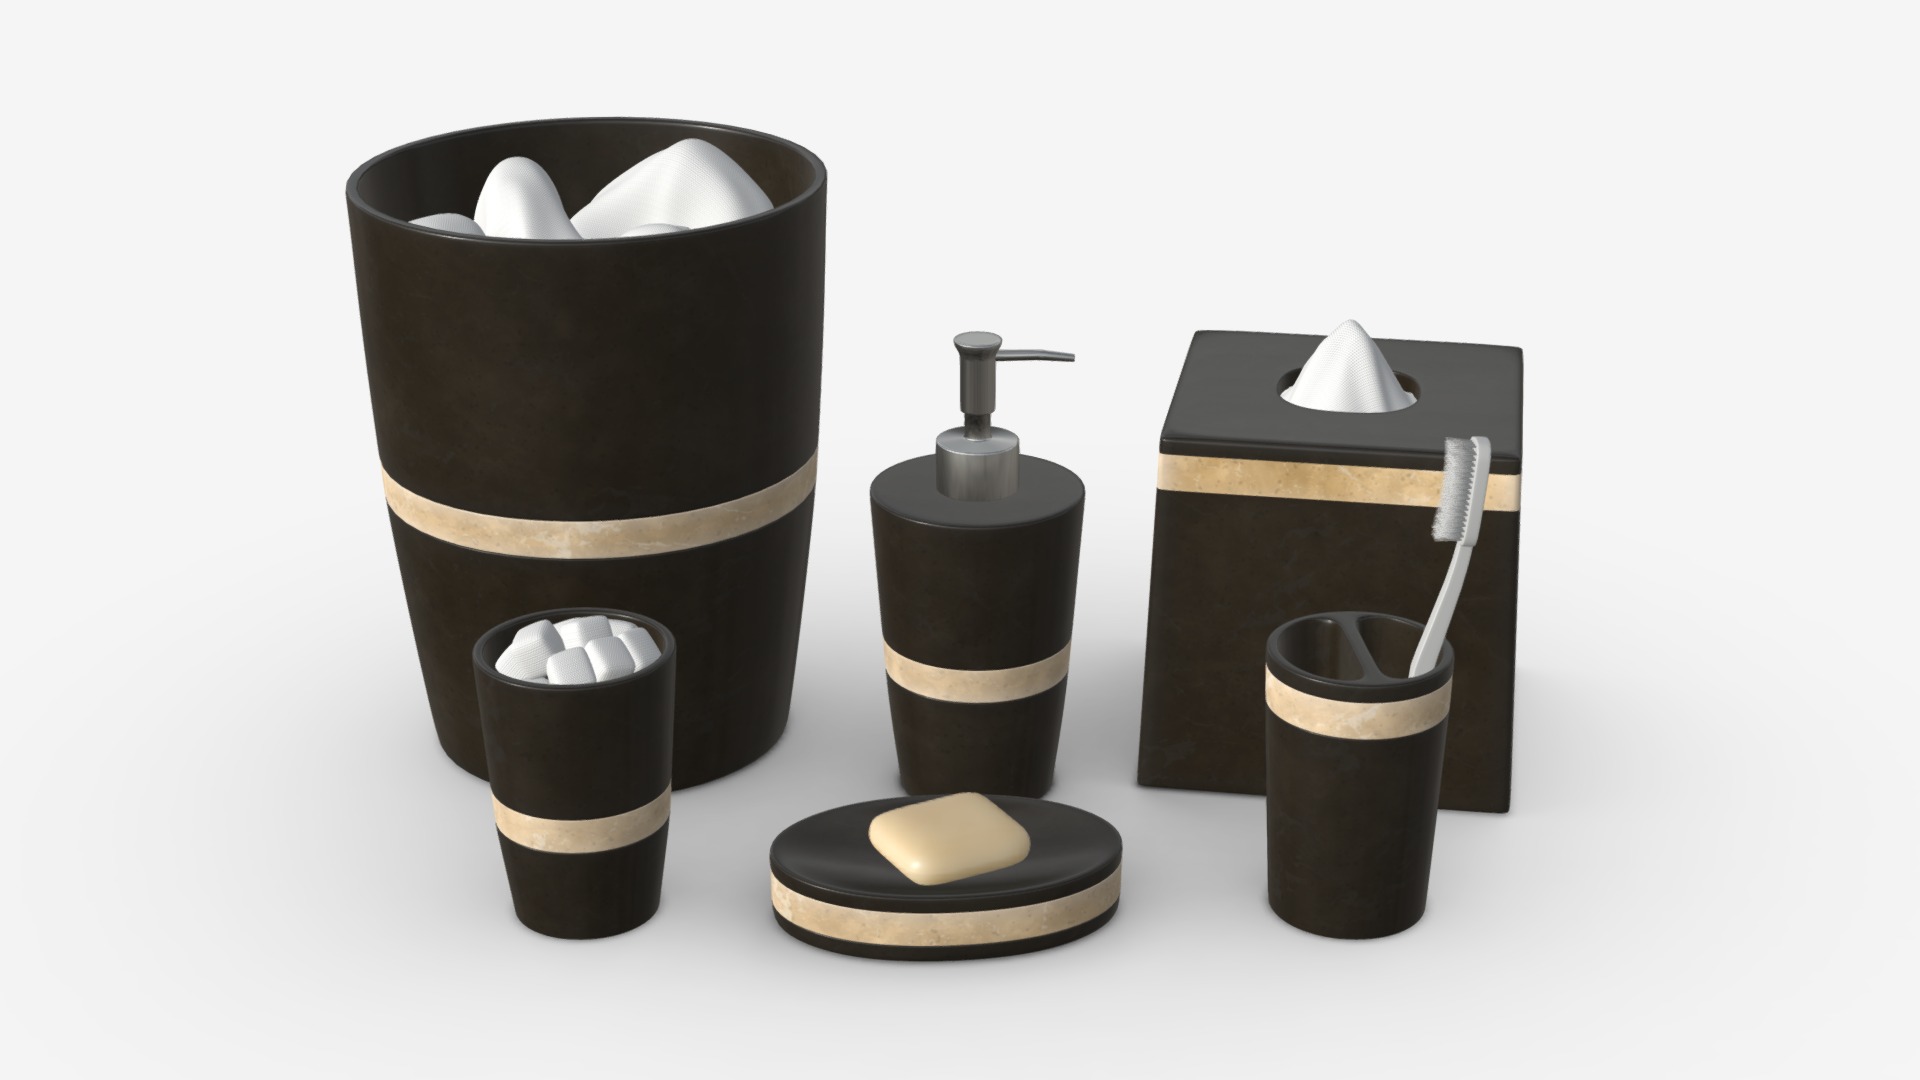 3D model Milano Bath Accessories from Austin Horn Classic - This is a 3D model of the Milano Bath Accessories from Austin Horn Classic. The 3D model is about a group of black and white cylindrical objects with white text.